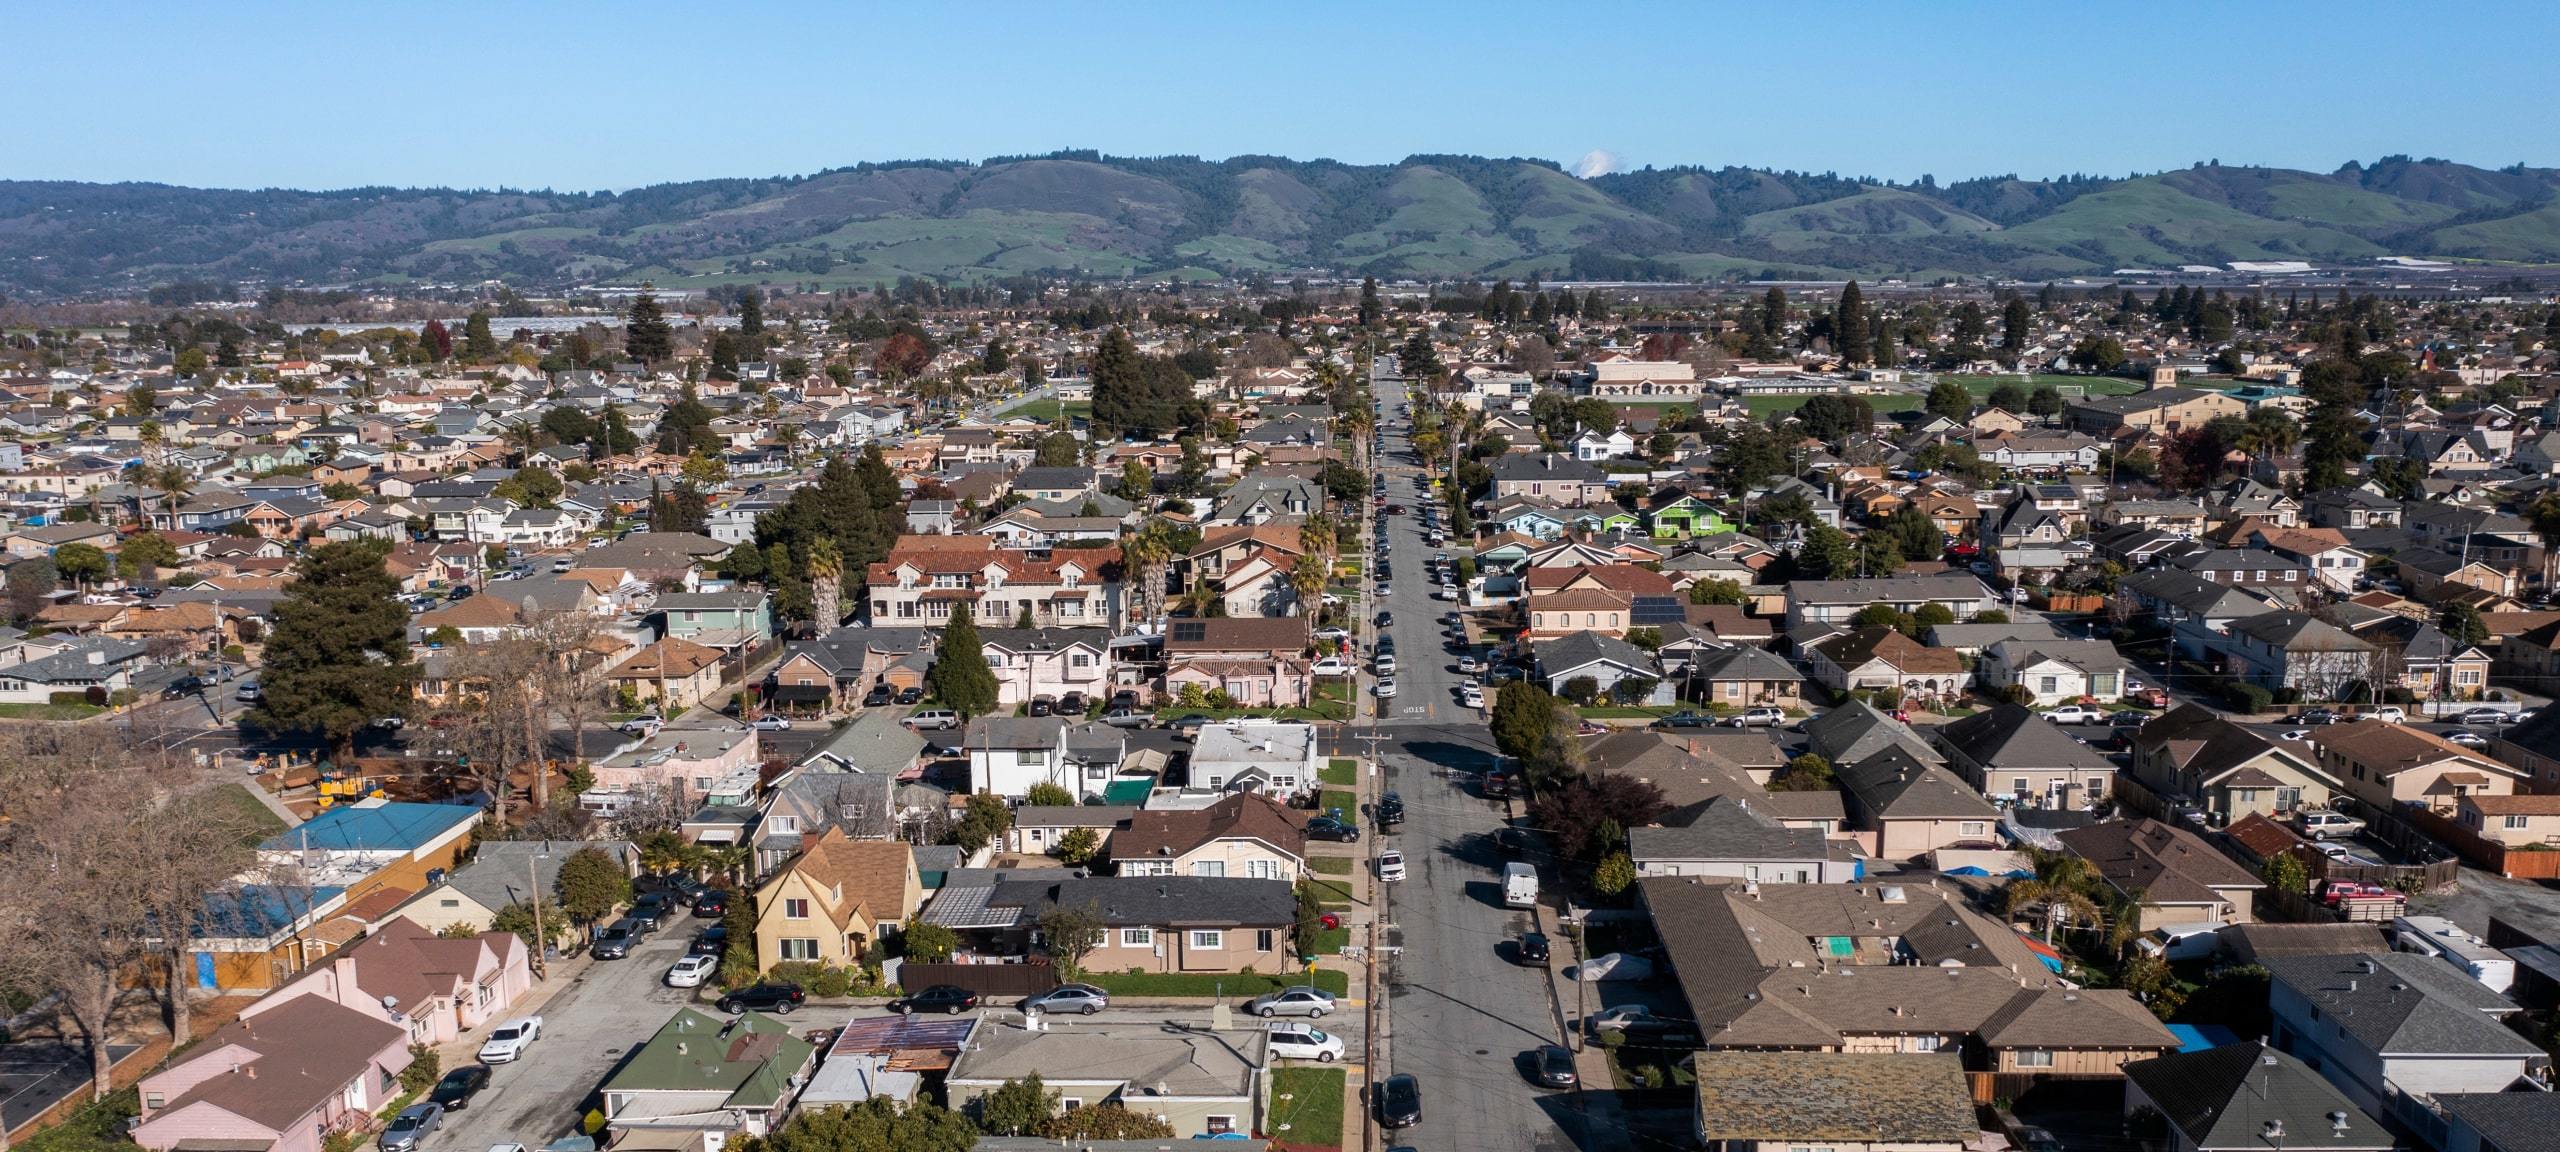 Aerial view of Watsonville, CA downtown and mountains